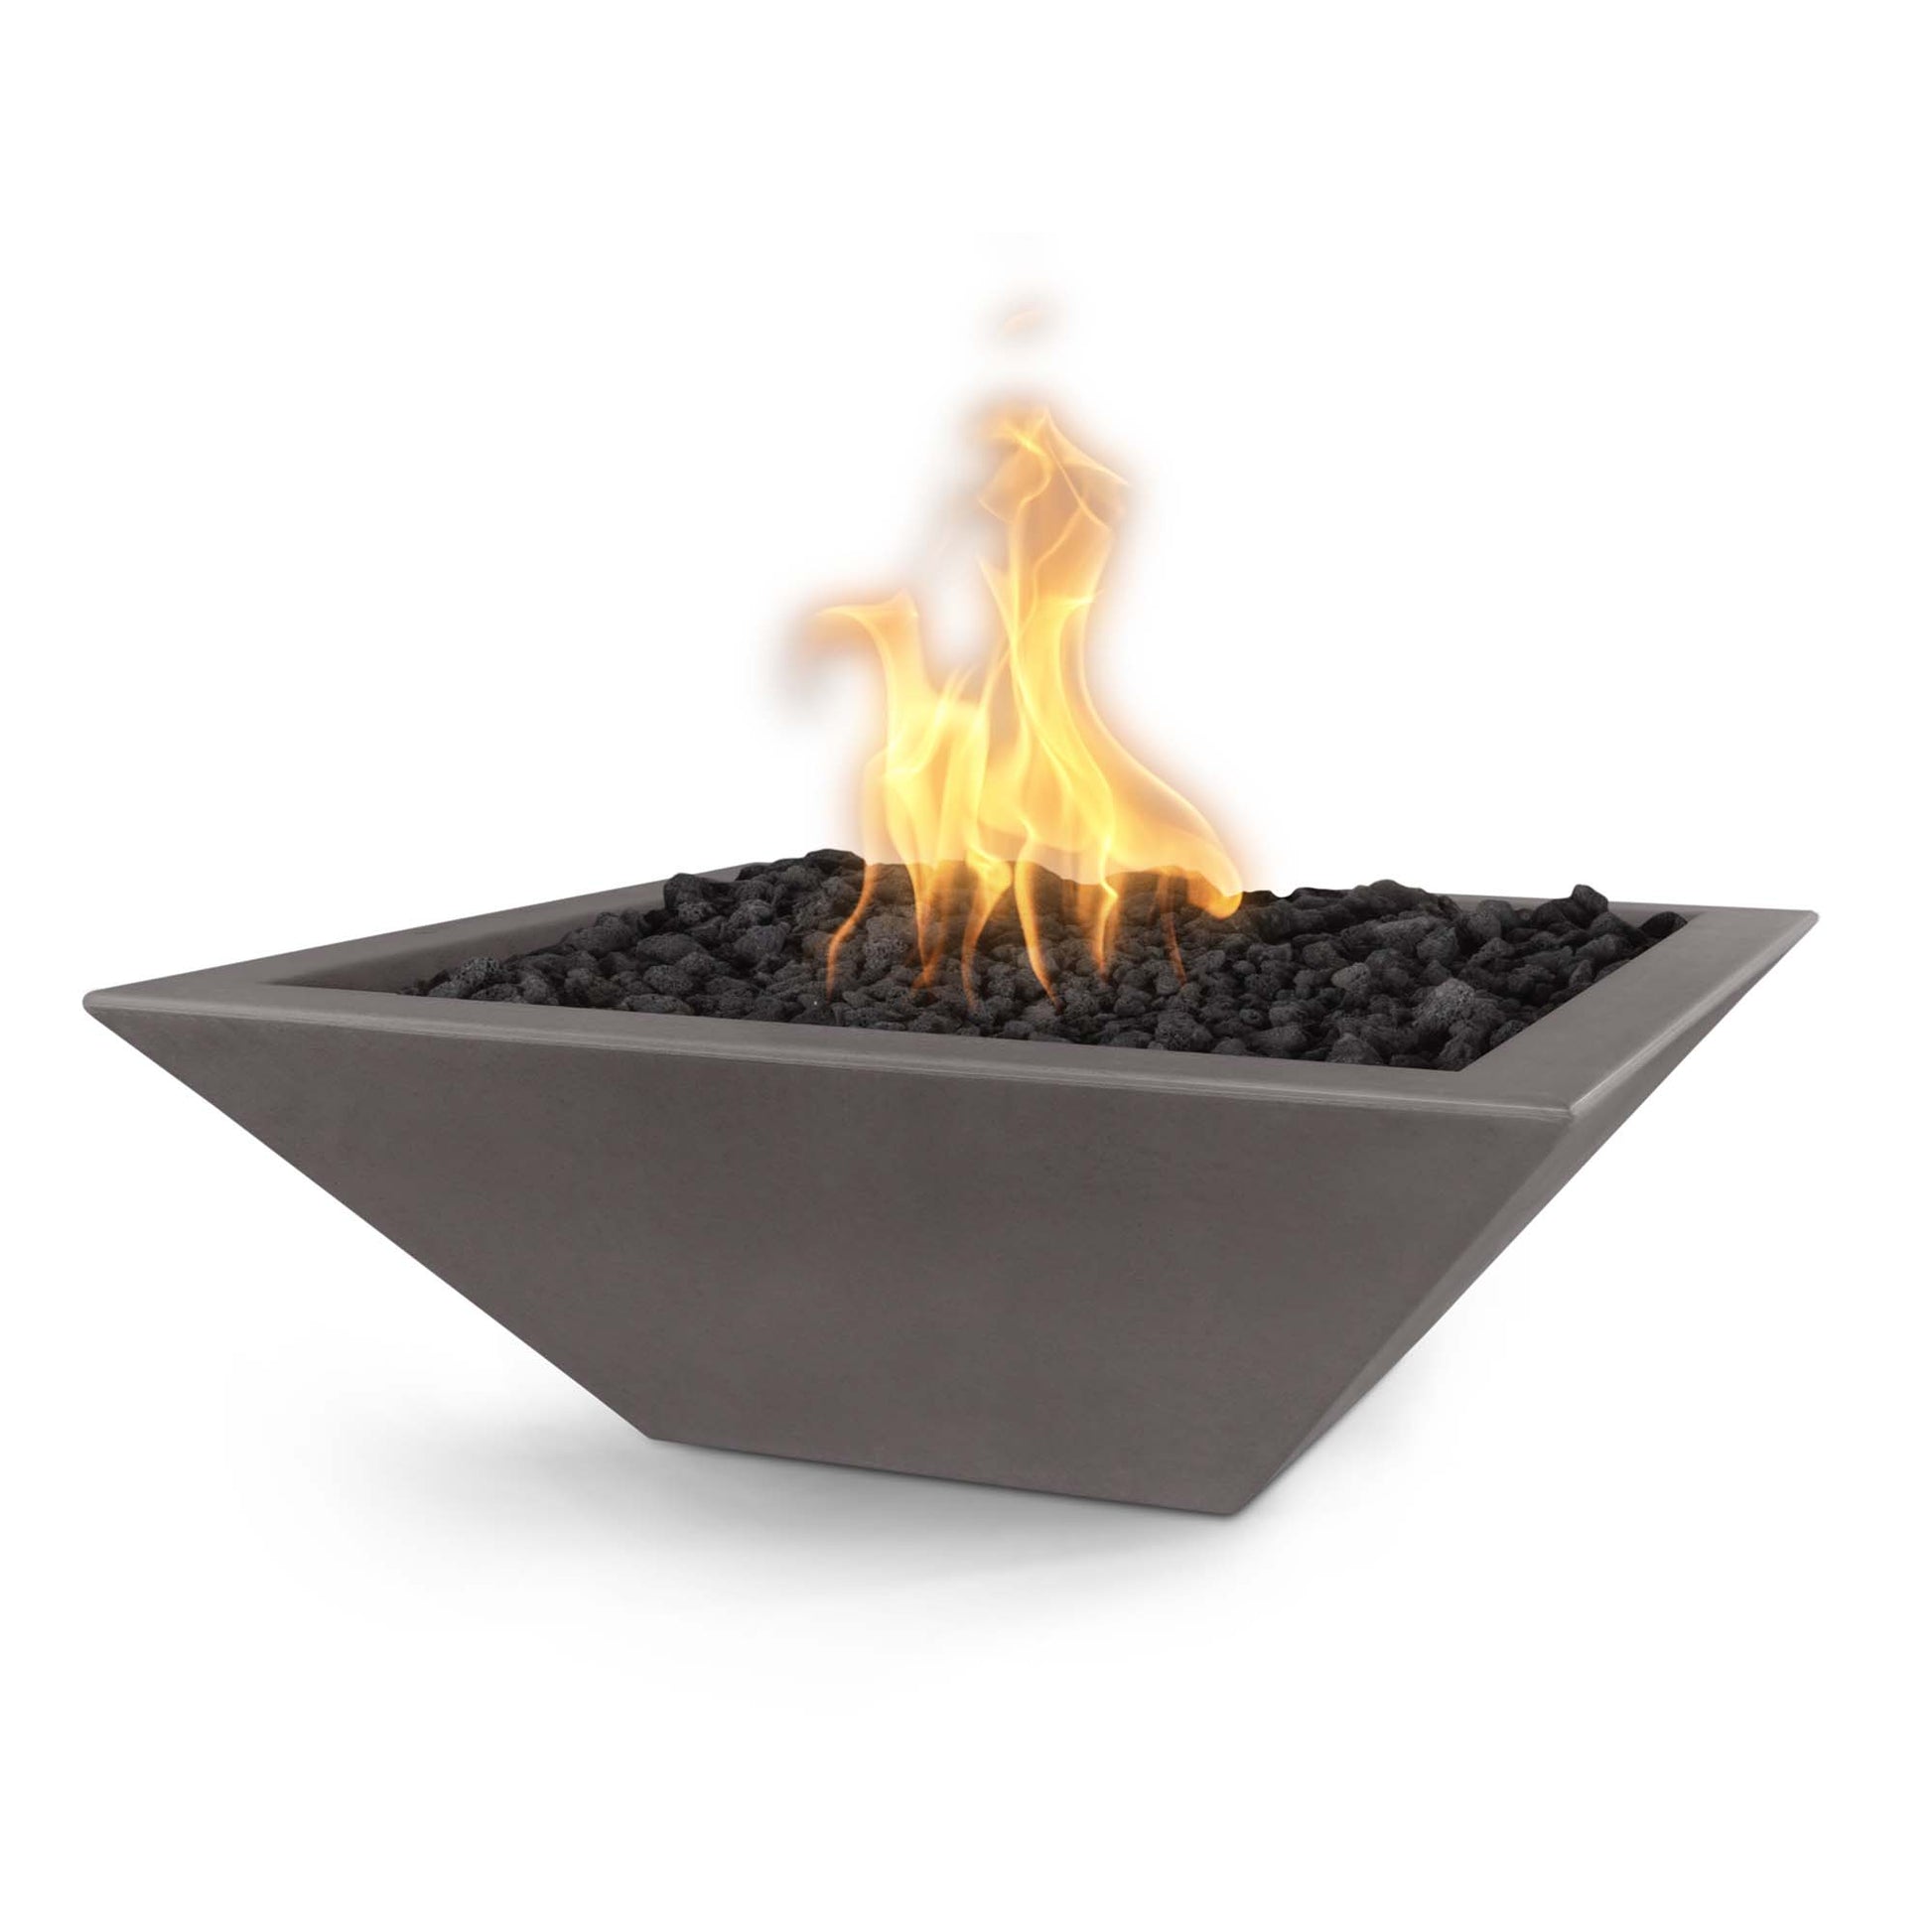 The Outdoor Plus Square Maya 24" Rustic White GFRC Concrete Liquid Propane Fire Bowl with Match Lit with Flame Sense Ignition